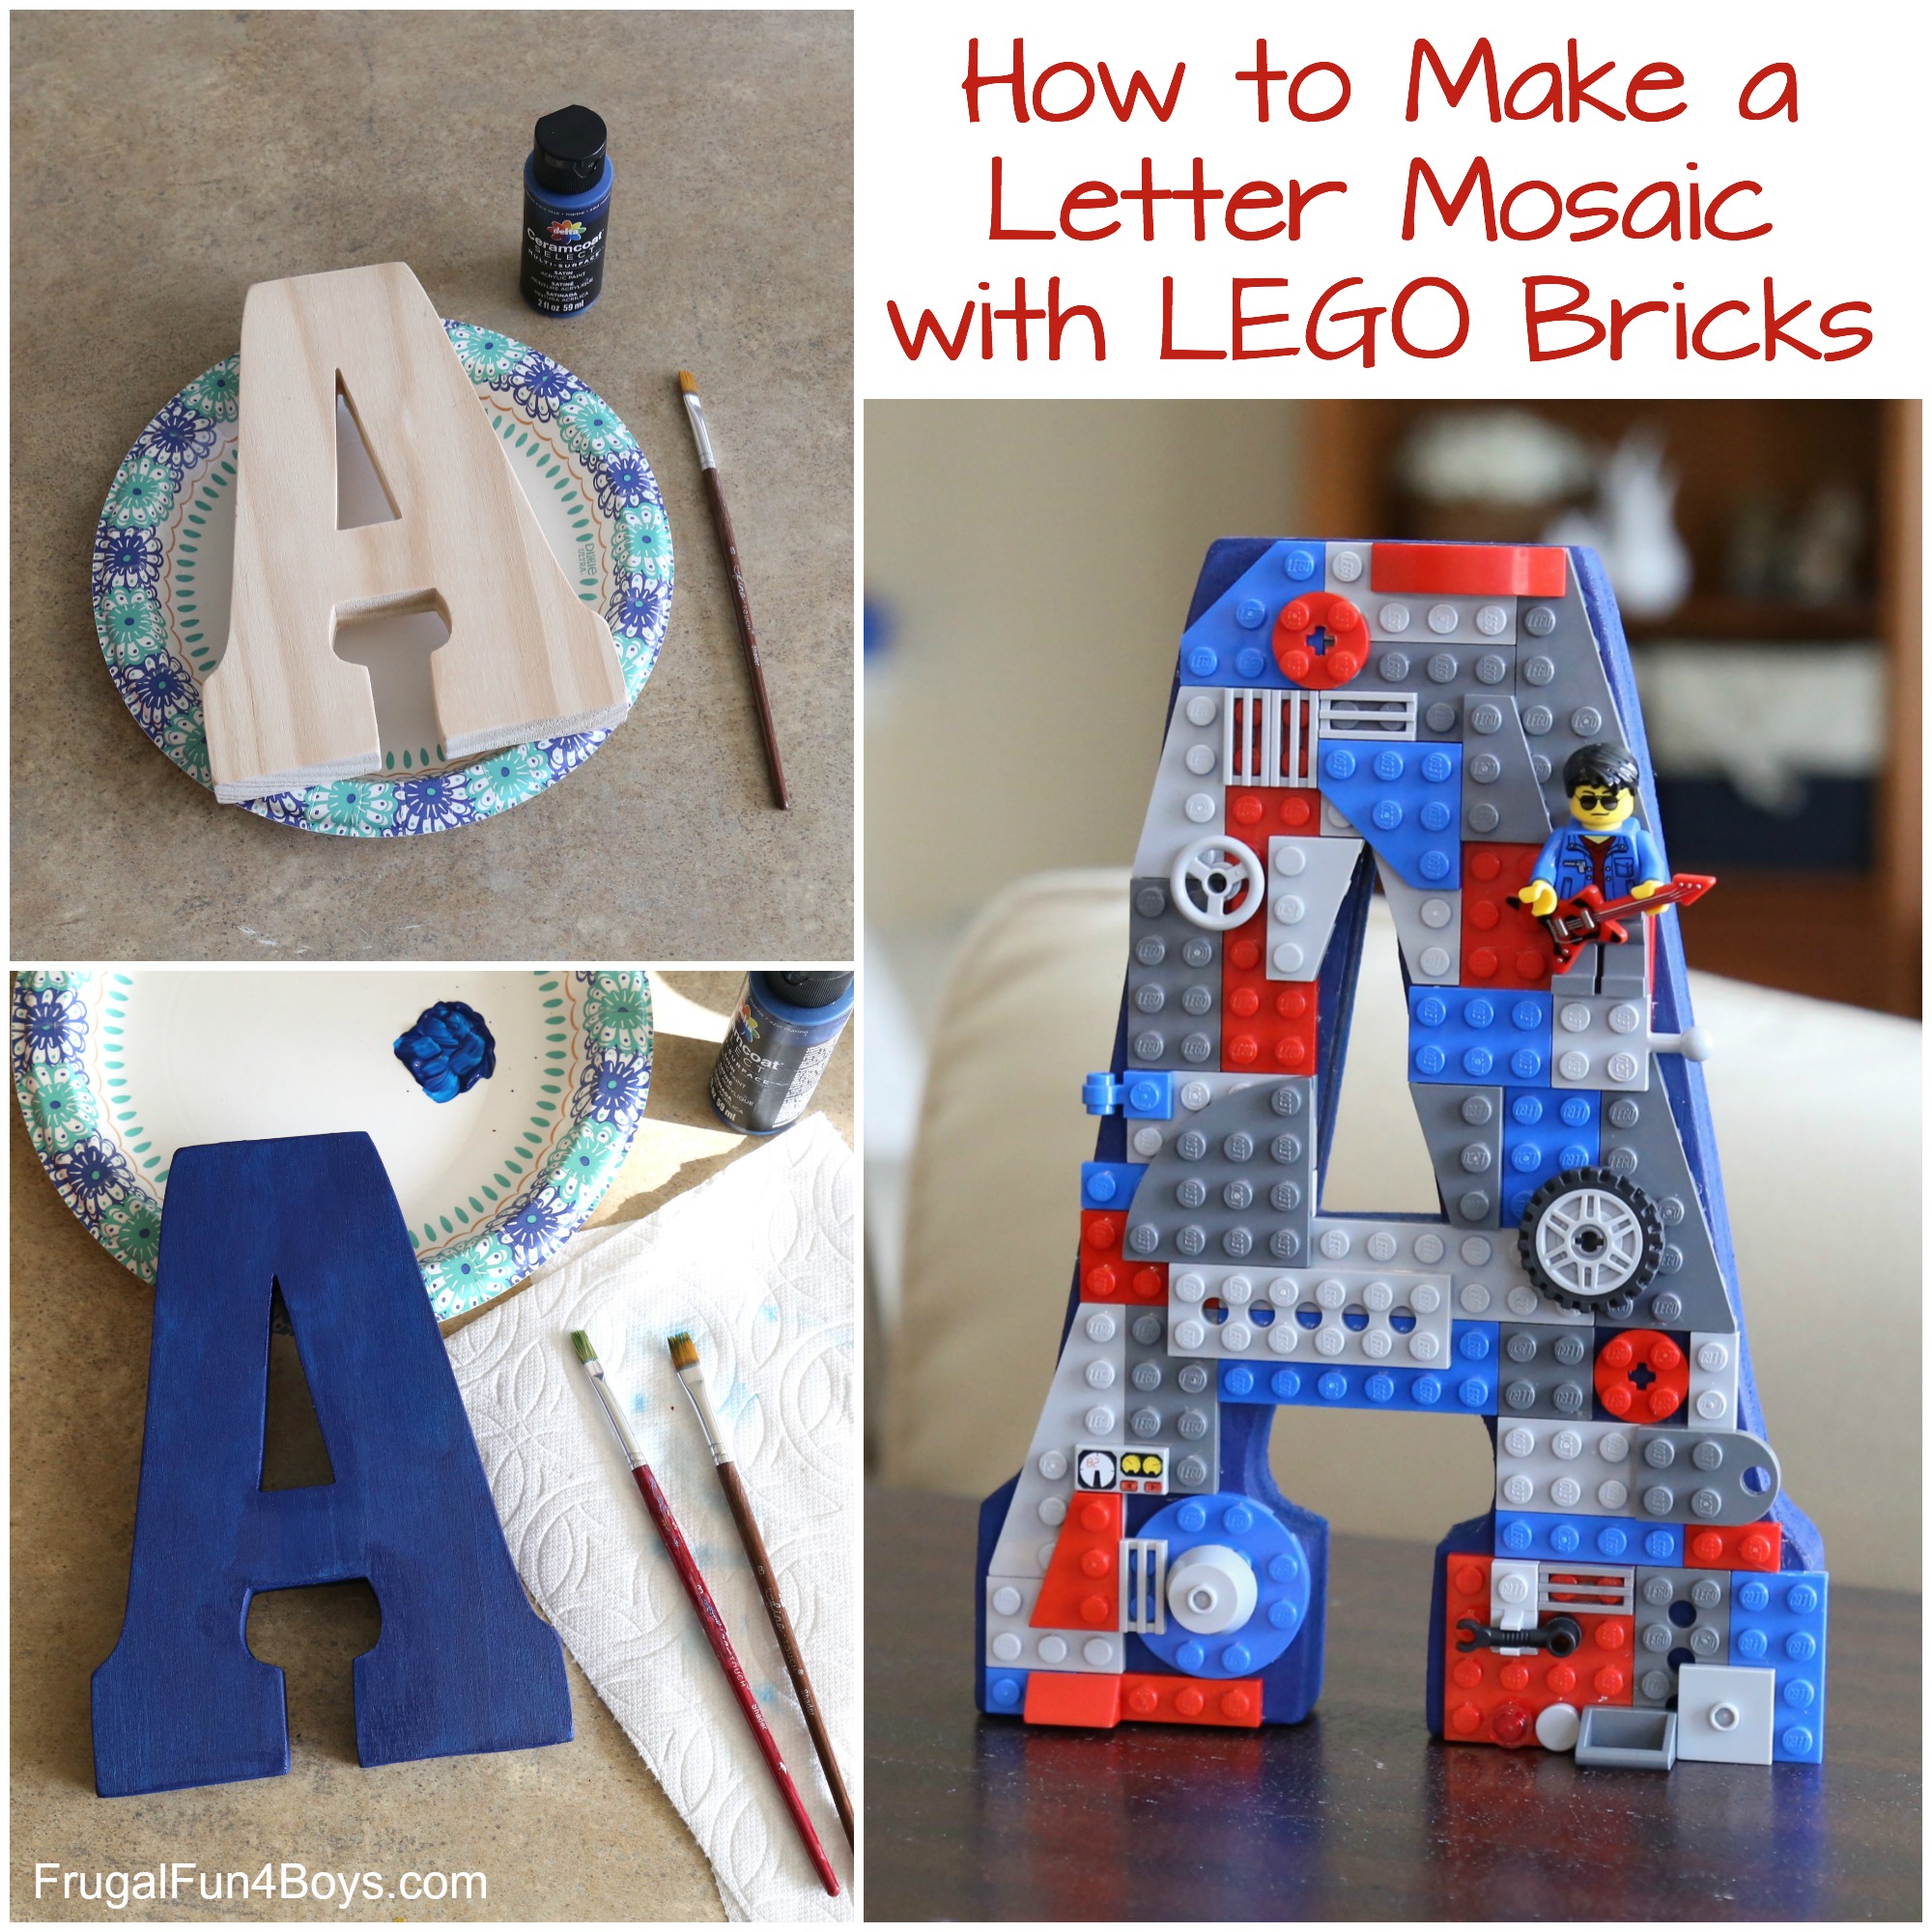 How to Make a Letter Mosaic with LEGO Bricks - Frugal Fun For Boys and